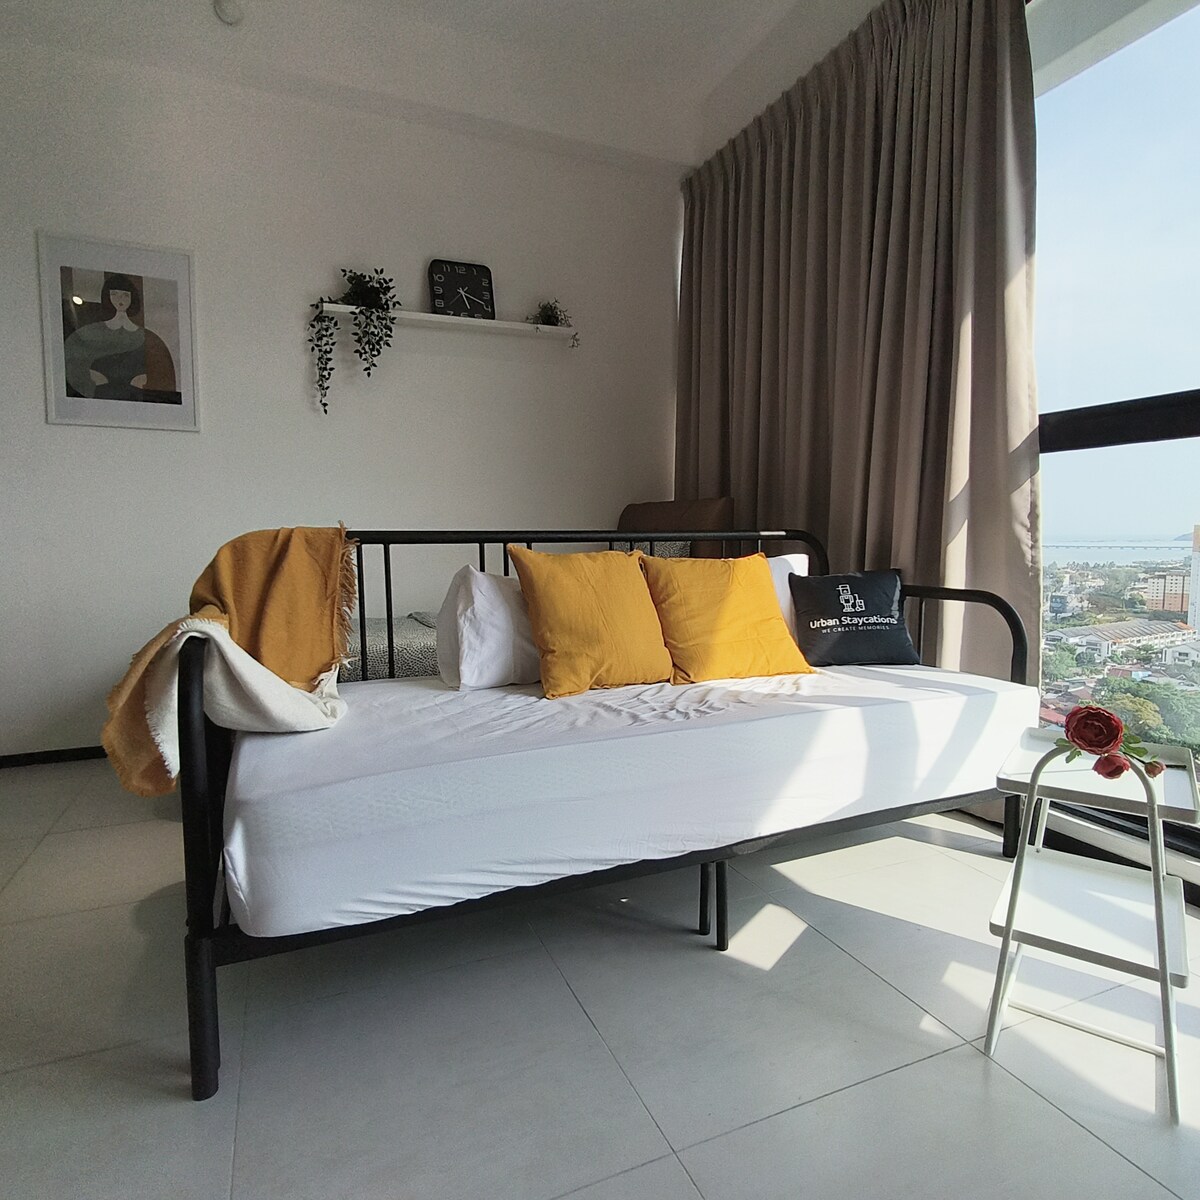 (New) 2BR Swanky Homestay @ Urban Suites 10pax